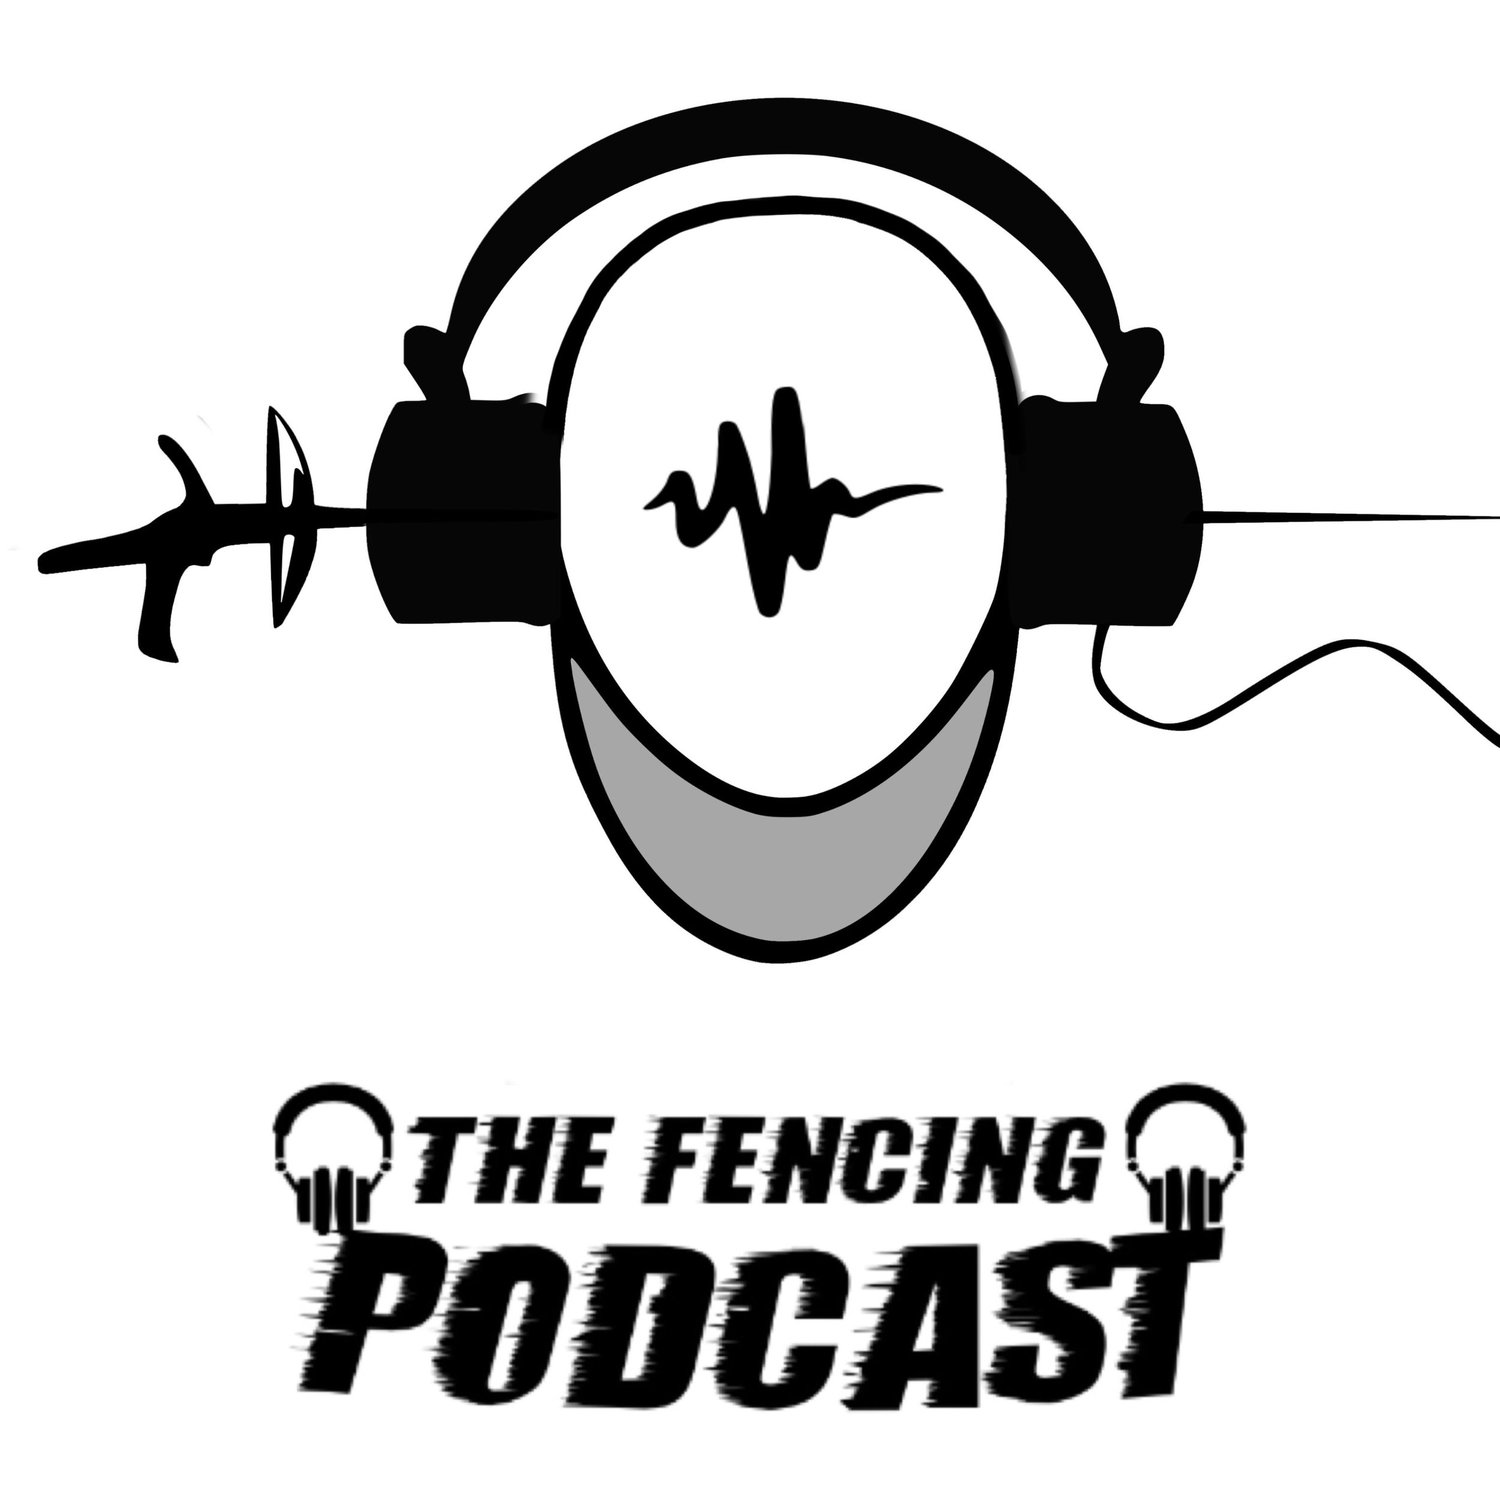 The Fencing Podcast